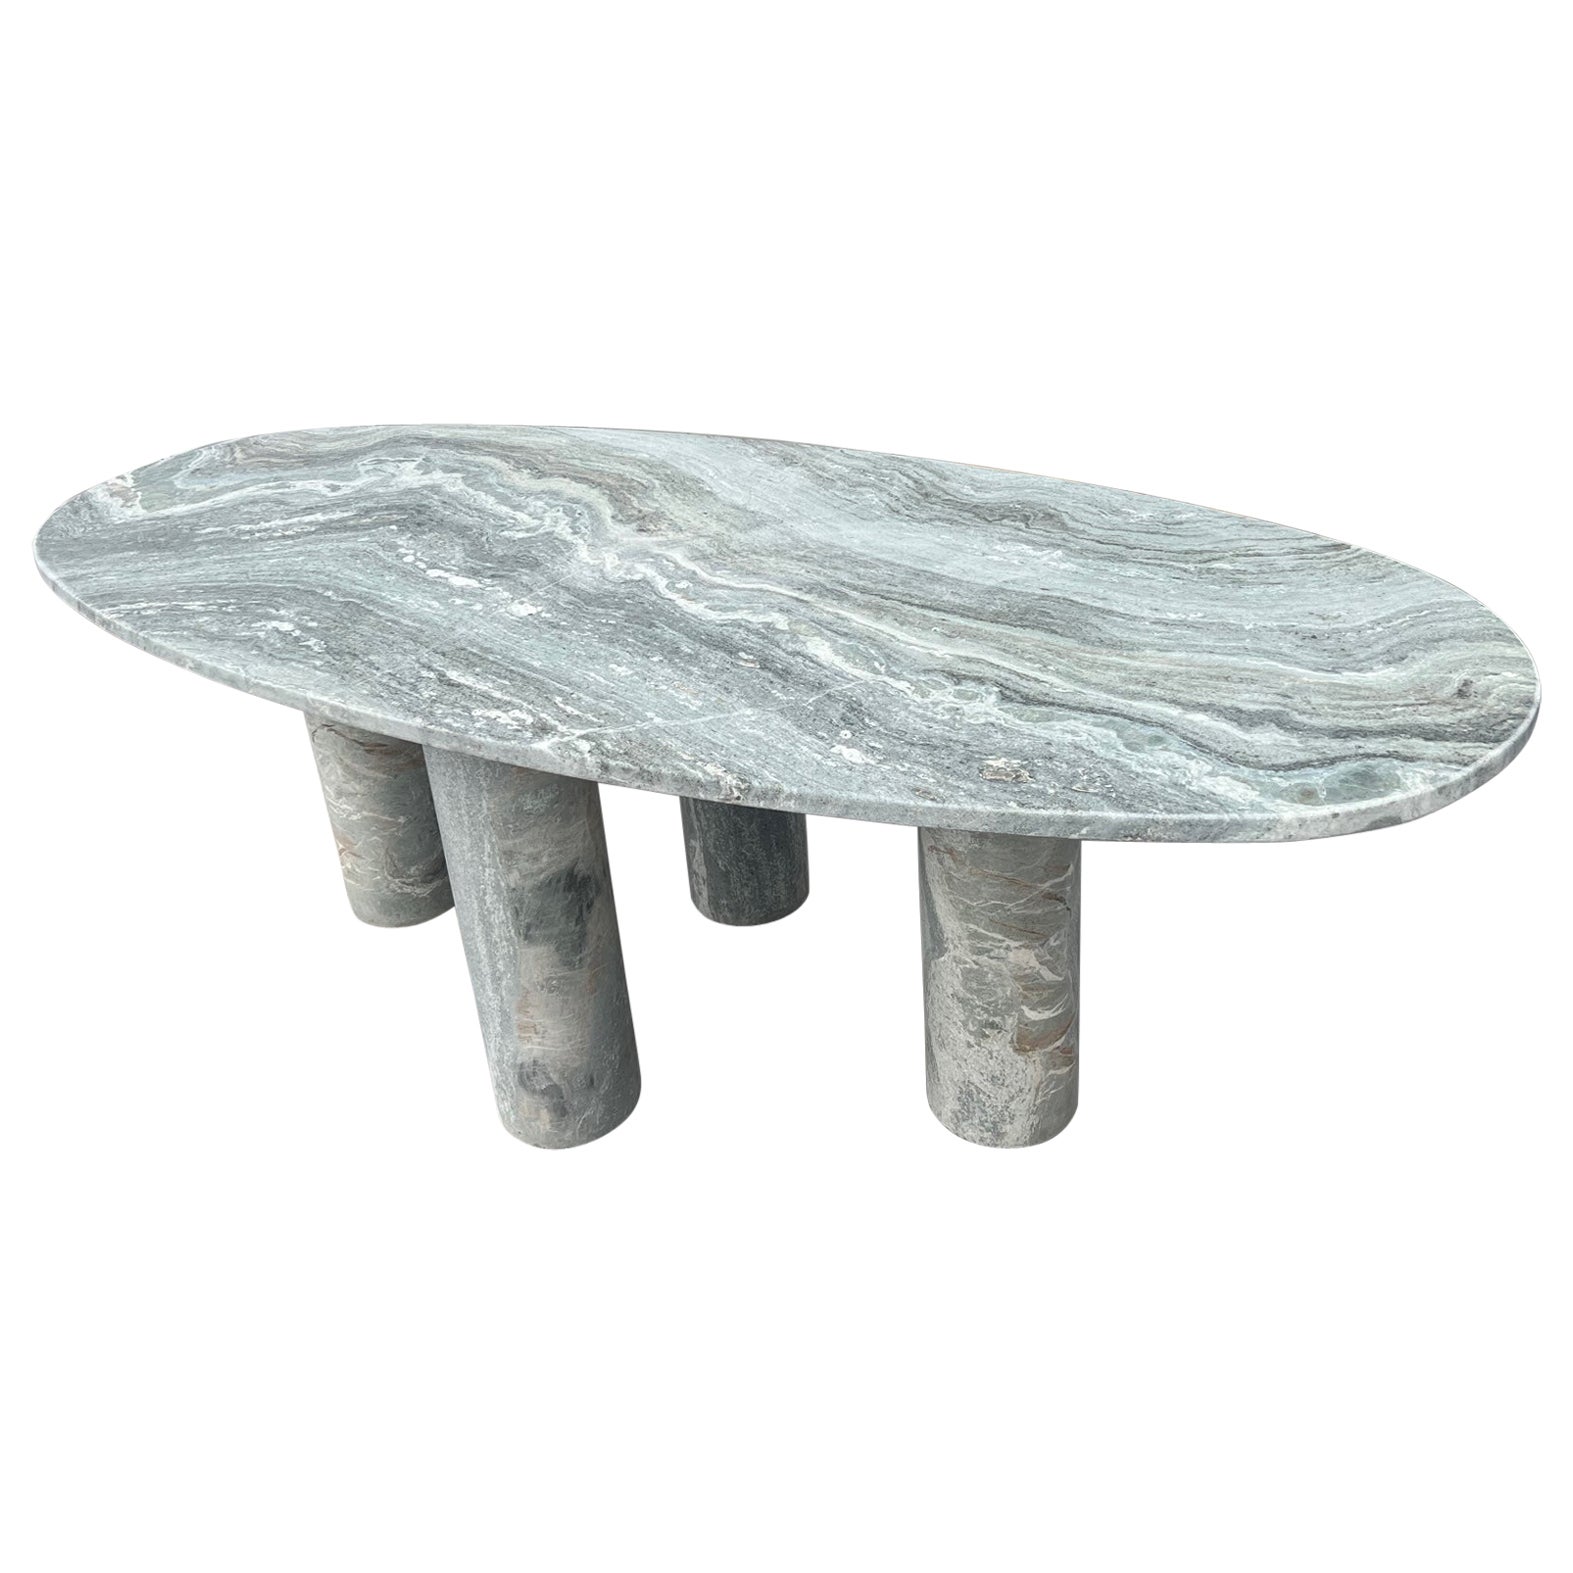 Large Oval Green Marble Dining Table with Column Legs in the style of Bellini  For Sale